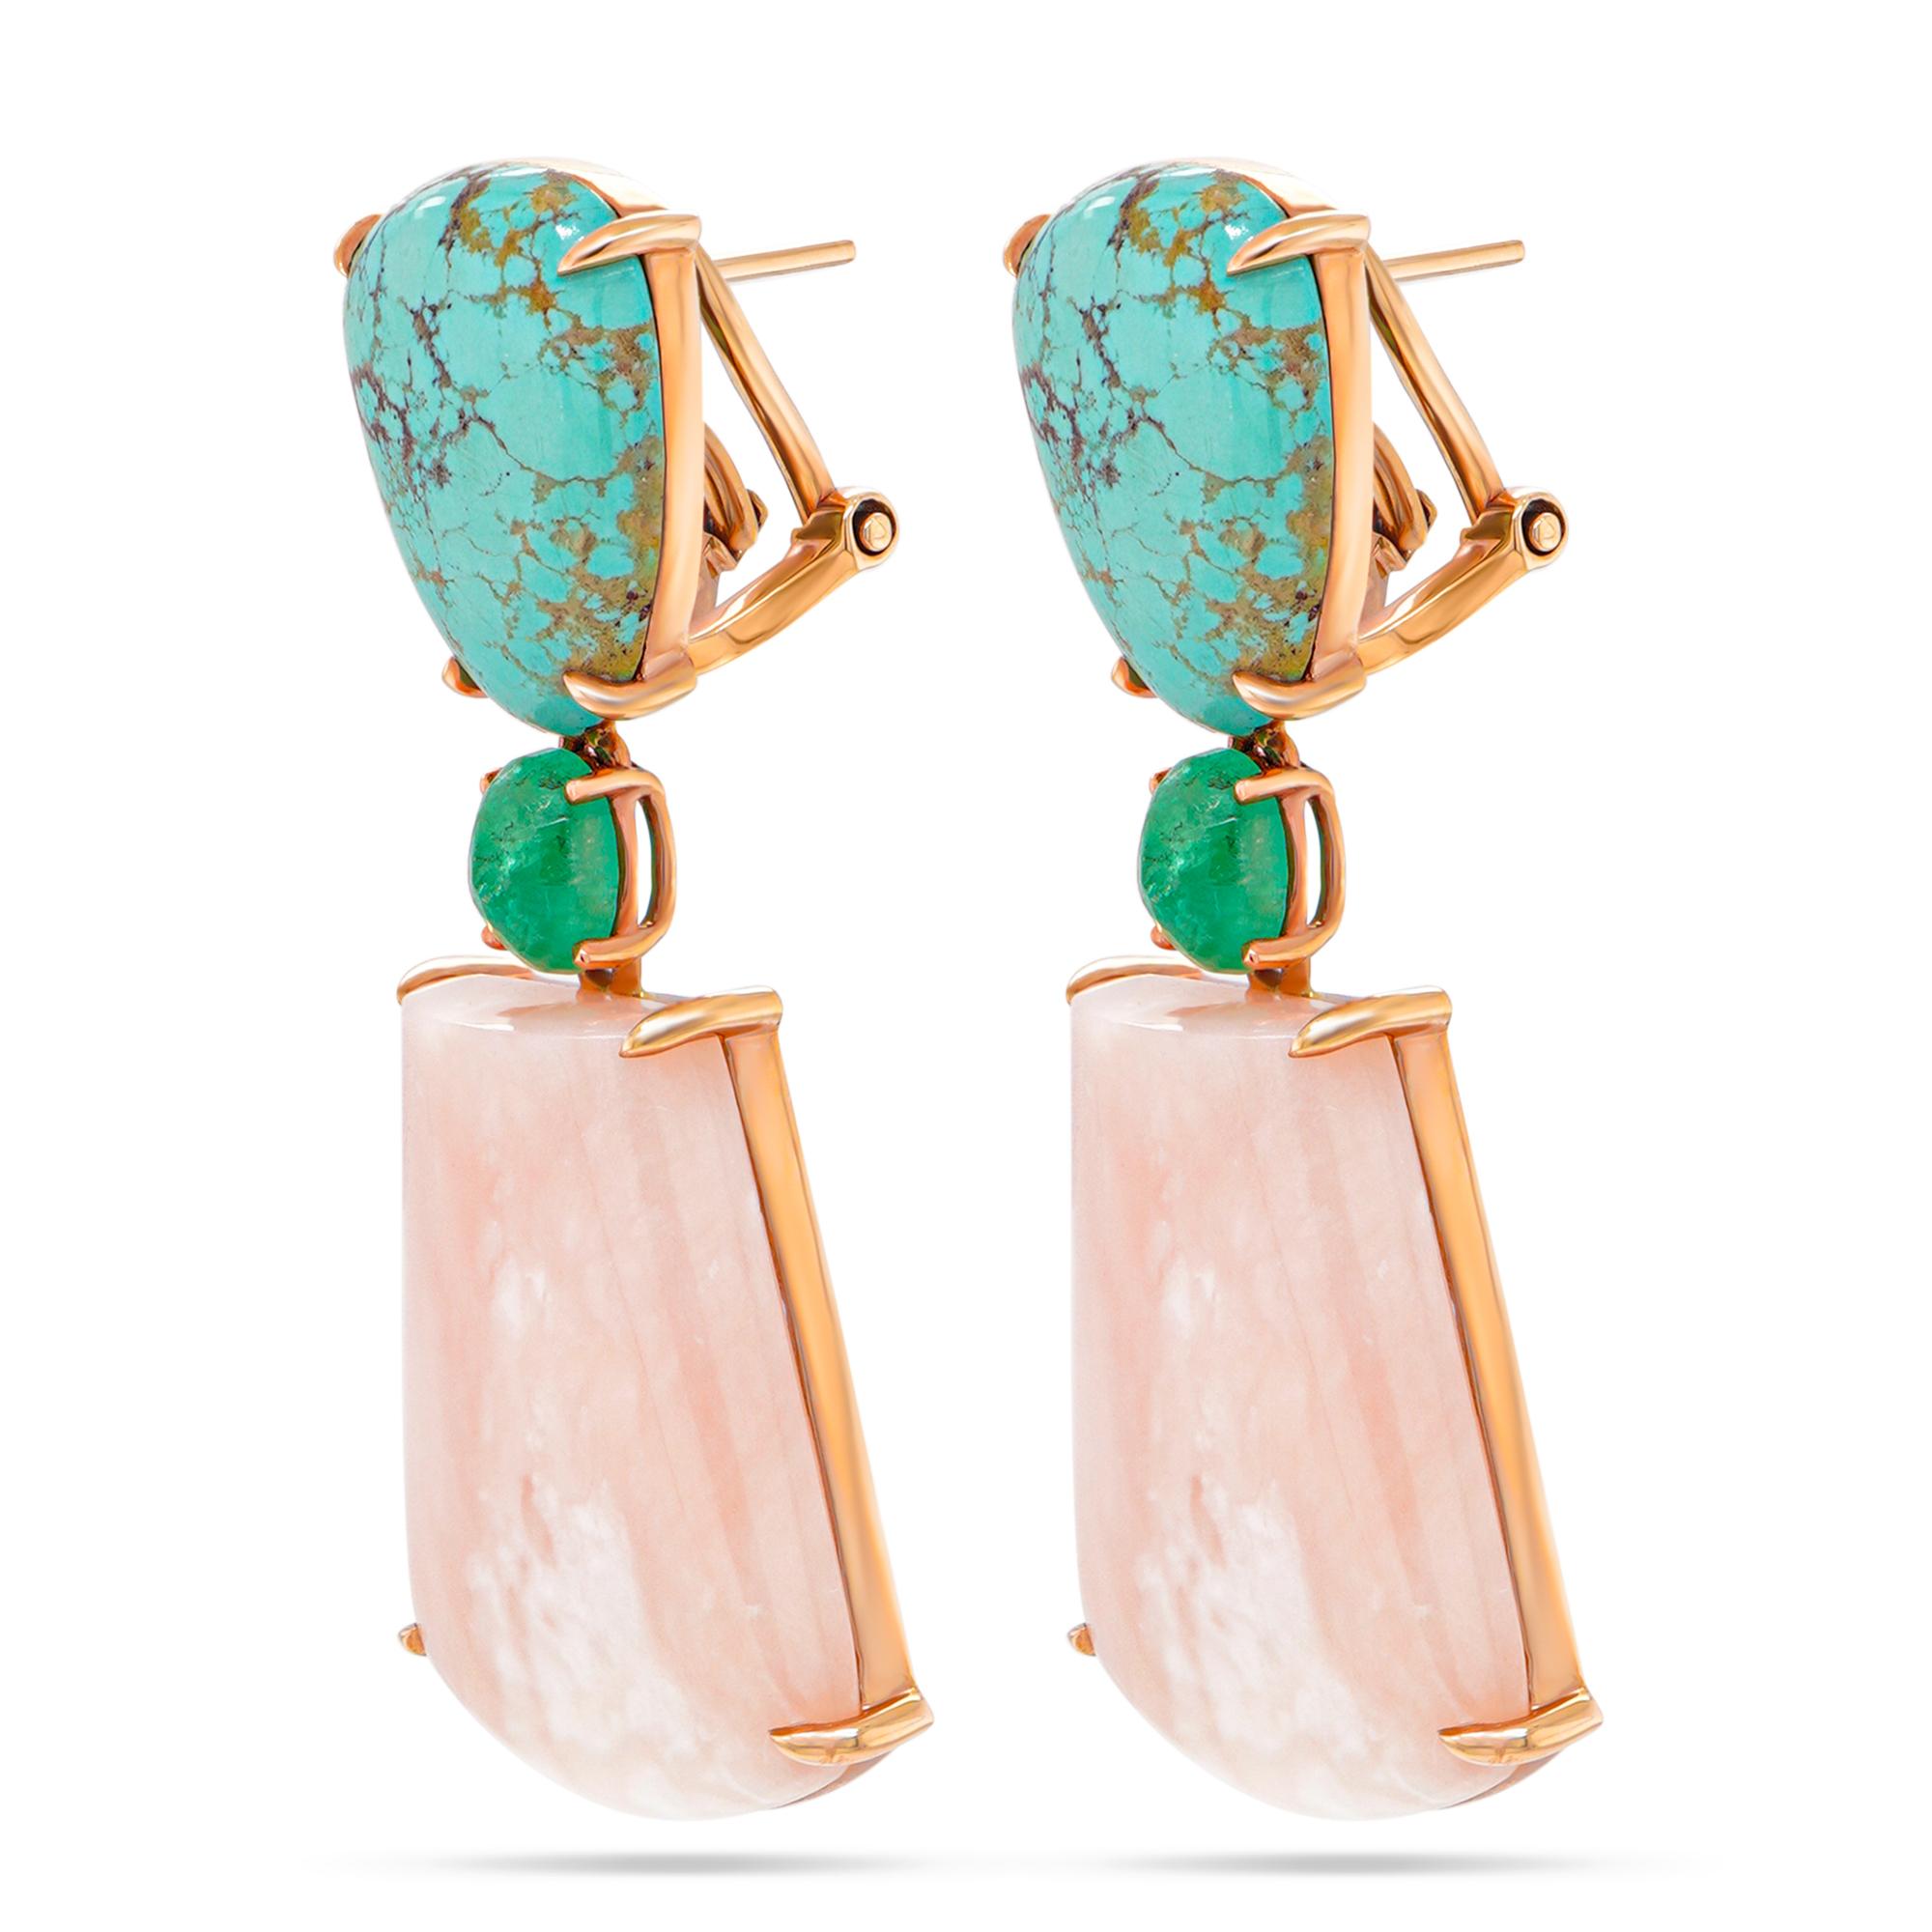 An organic combination of 29 Carats of Pink Opal with 10 carats of Arizona Turquoise are set together with 1.25 carats of Colombian Emeralds. This earring is hand made in Hong Kong in 18K